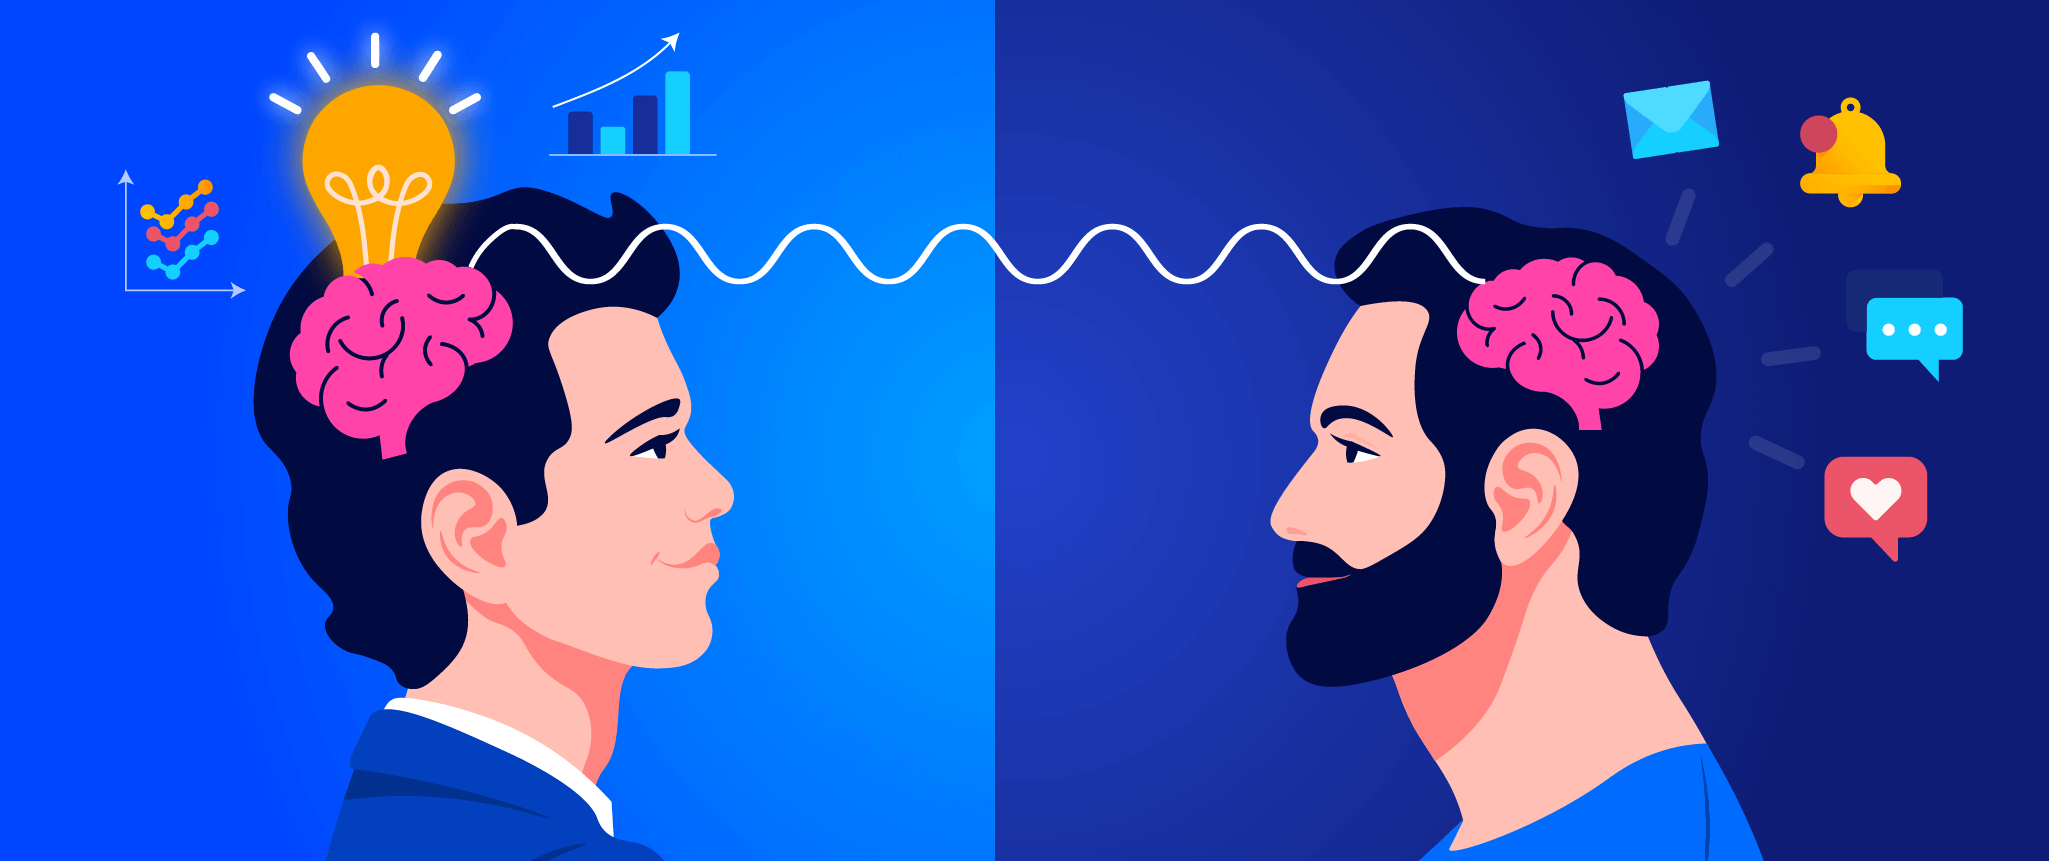 Empathy is Key for connecting to users - image of 2 people on similar brainwaves